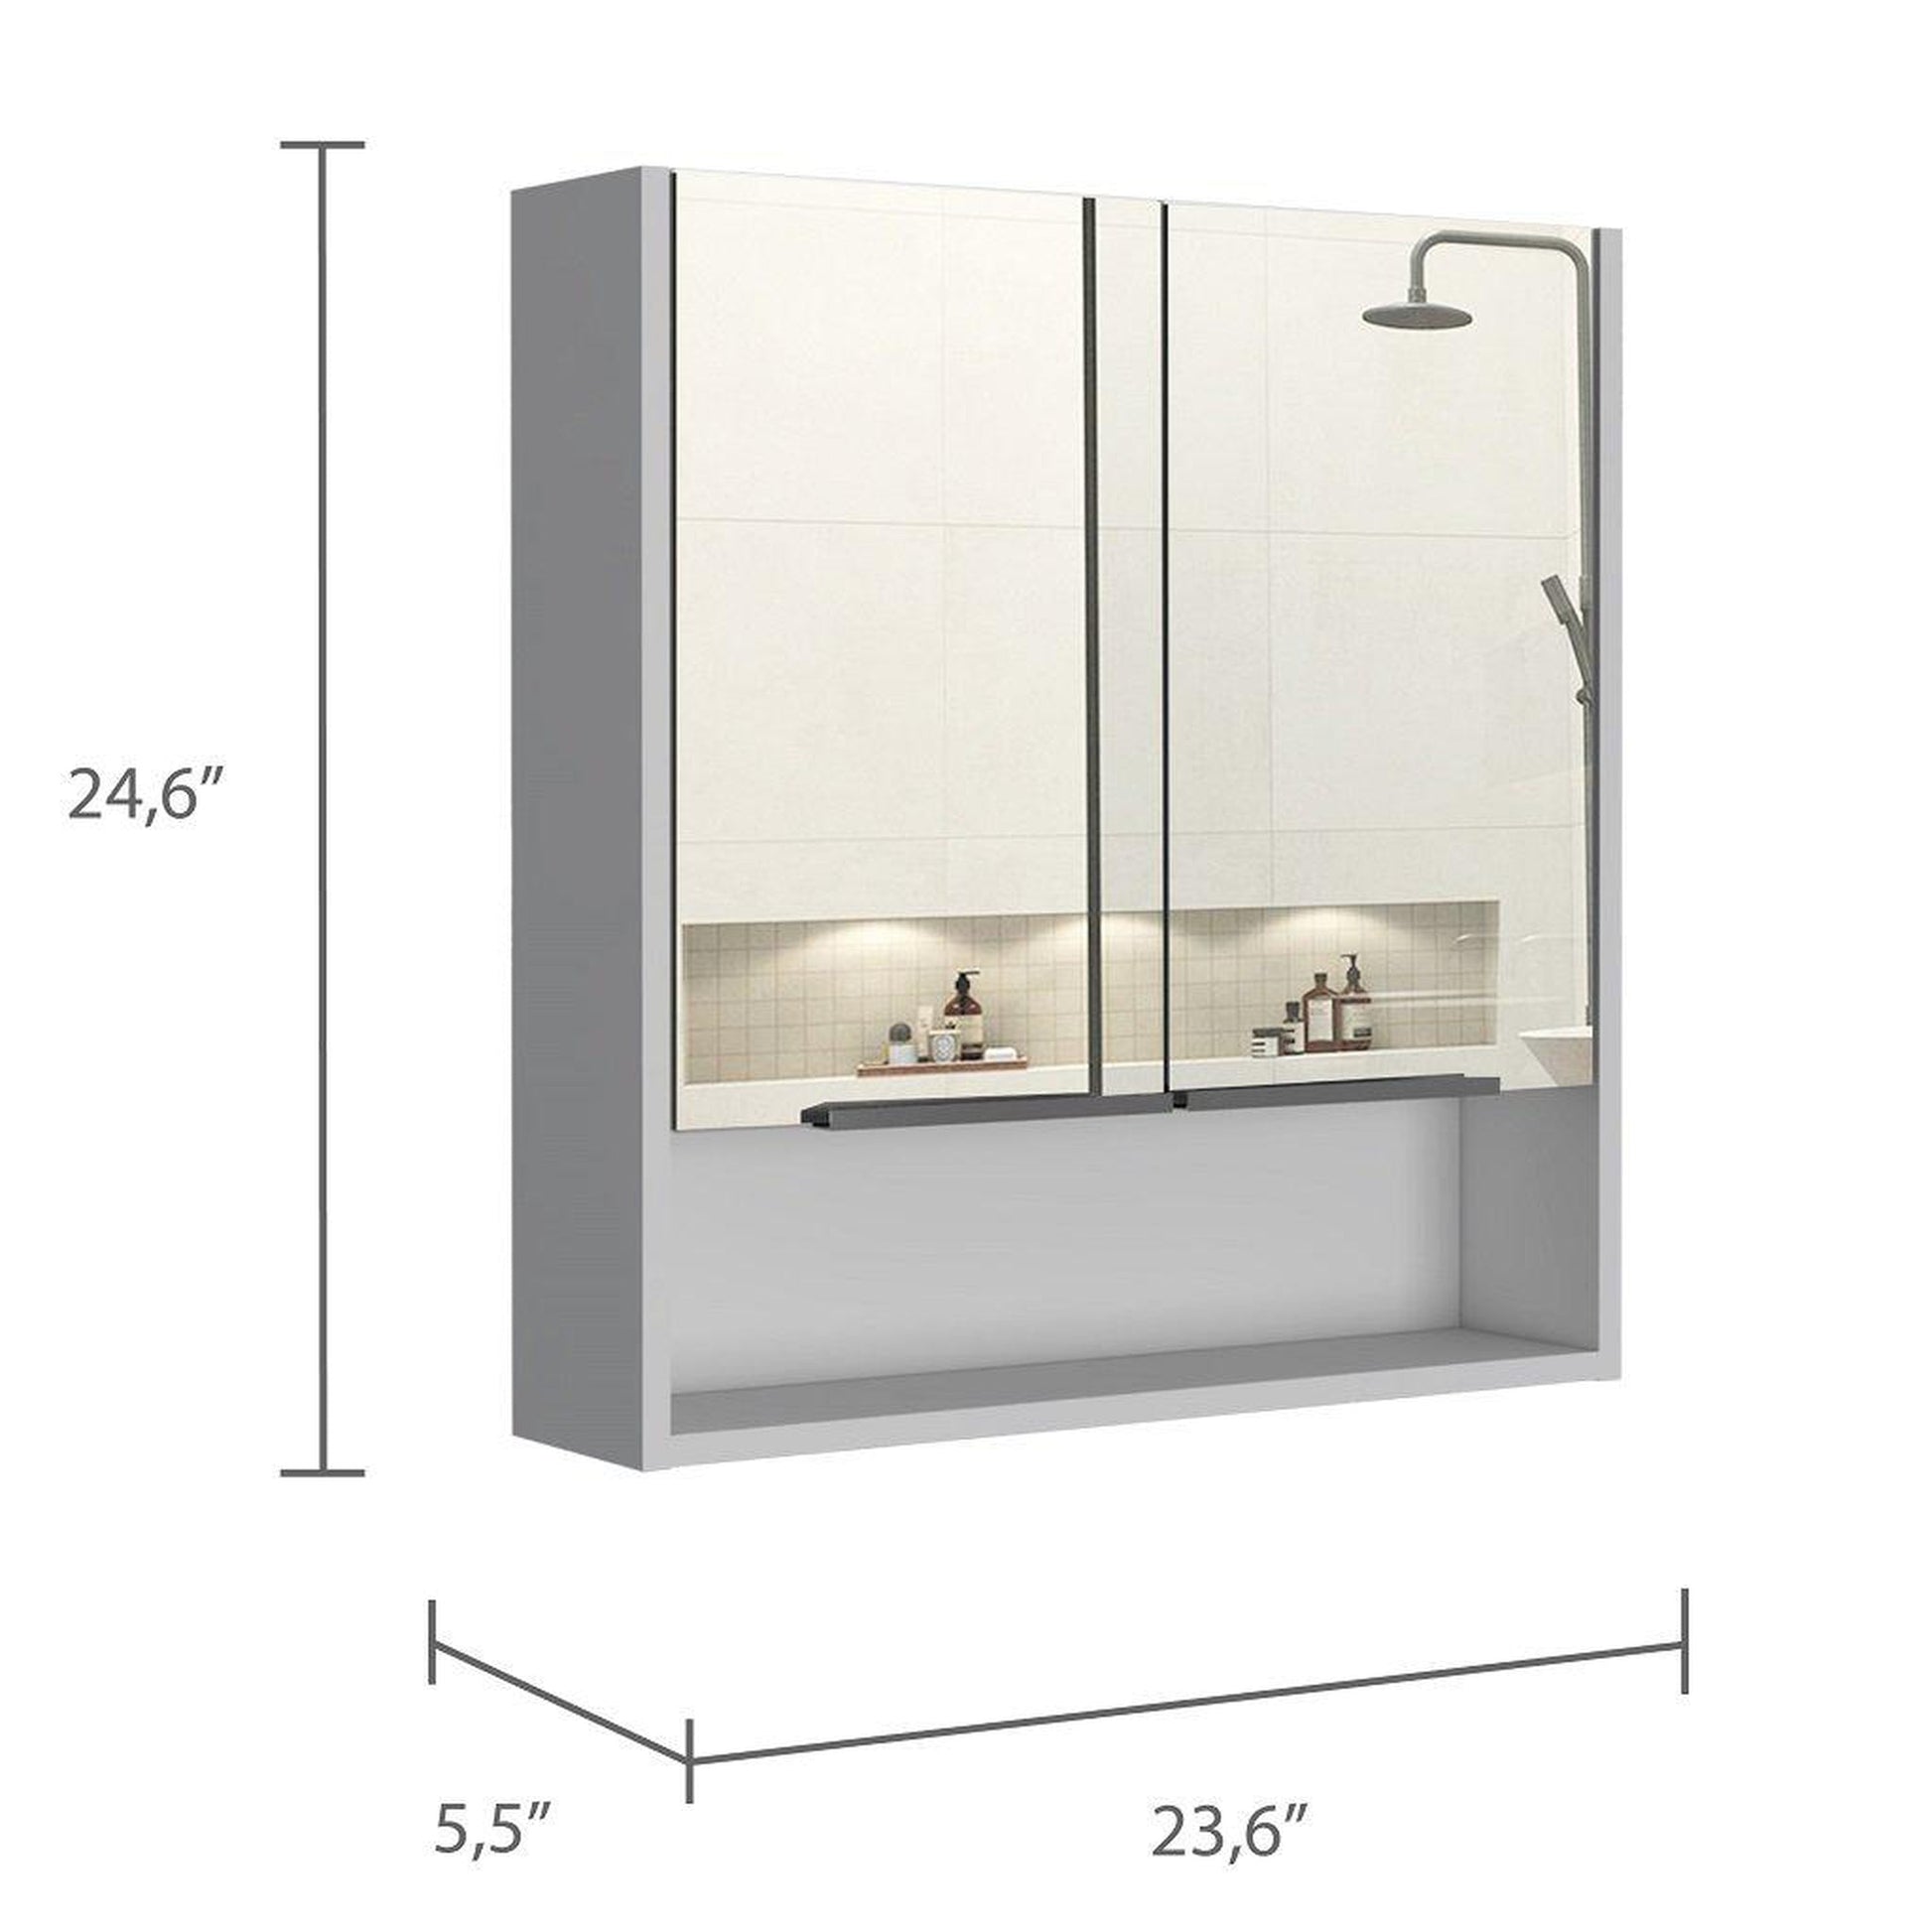 Ponte Giulio USA Glossy White 1-Tier Wall Mount Bathroom Shelf (23.625-in x  4.56-in) in the Bathroom Shelves department at